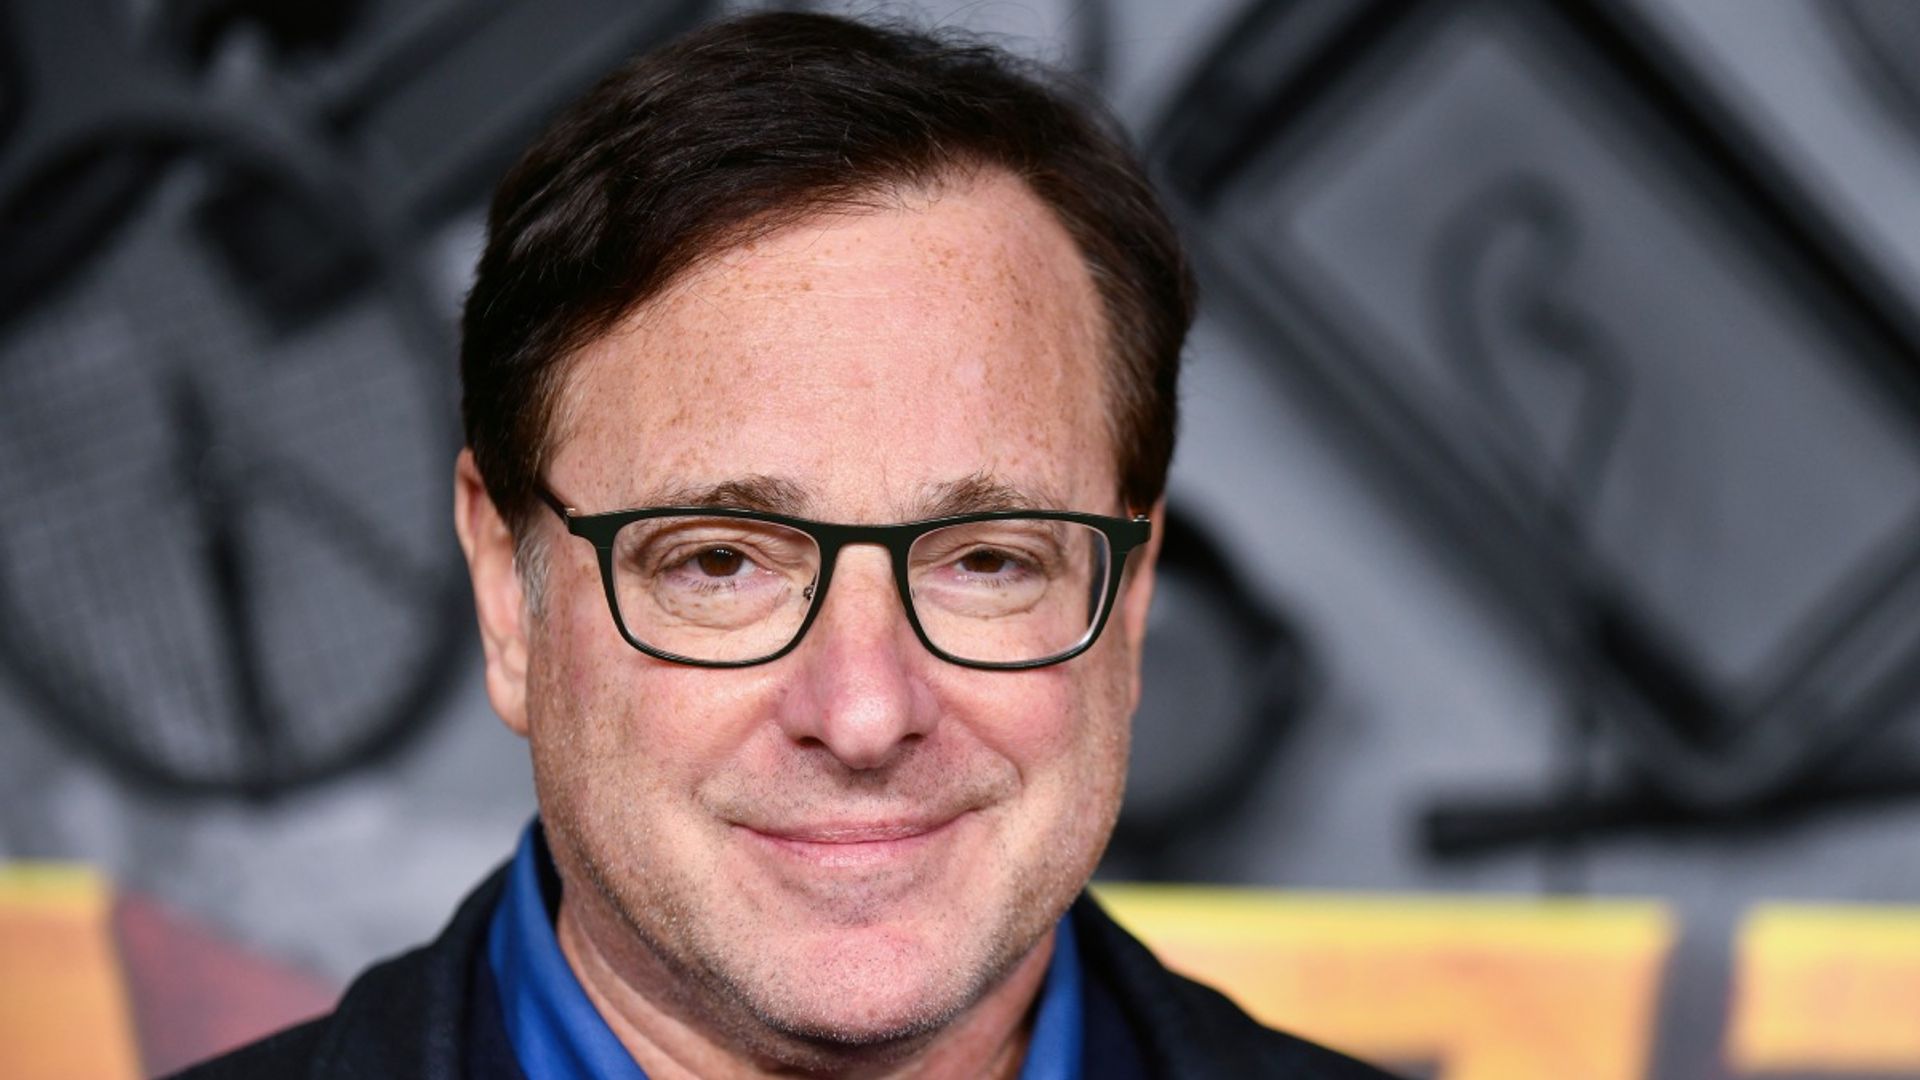 Full House star and comedian Bob Saget dies age 65